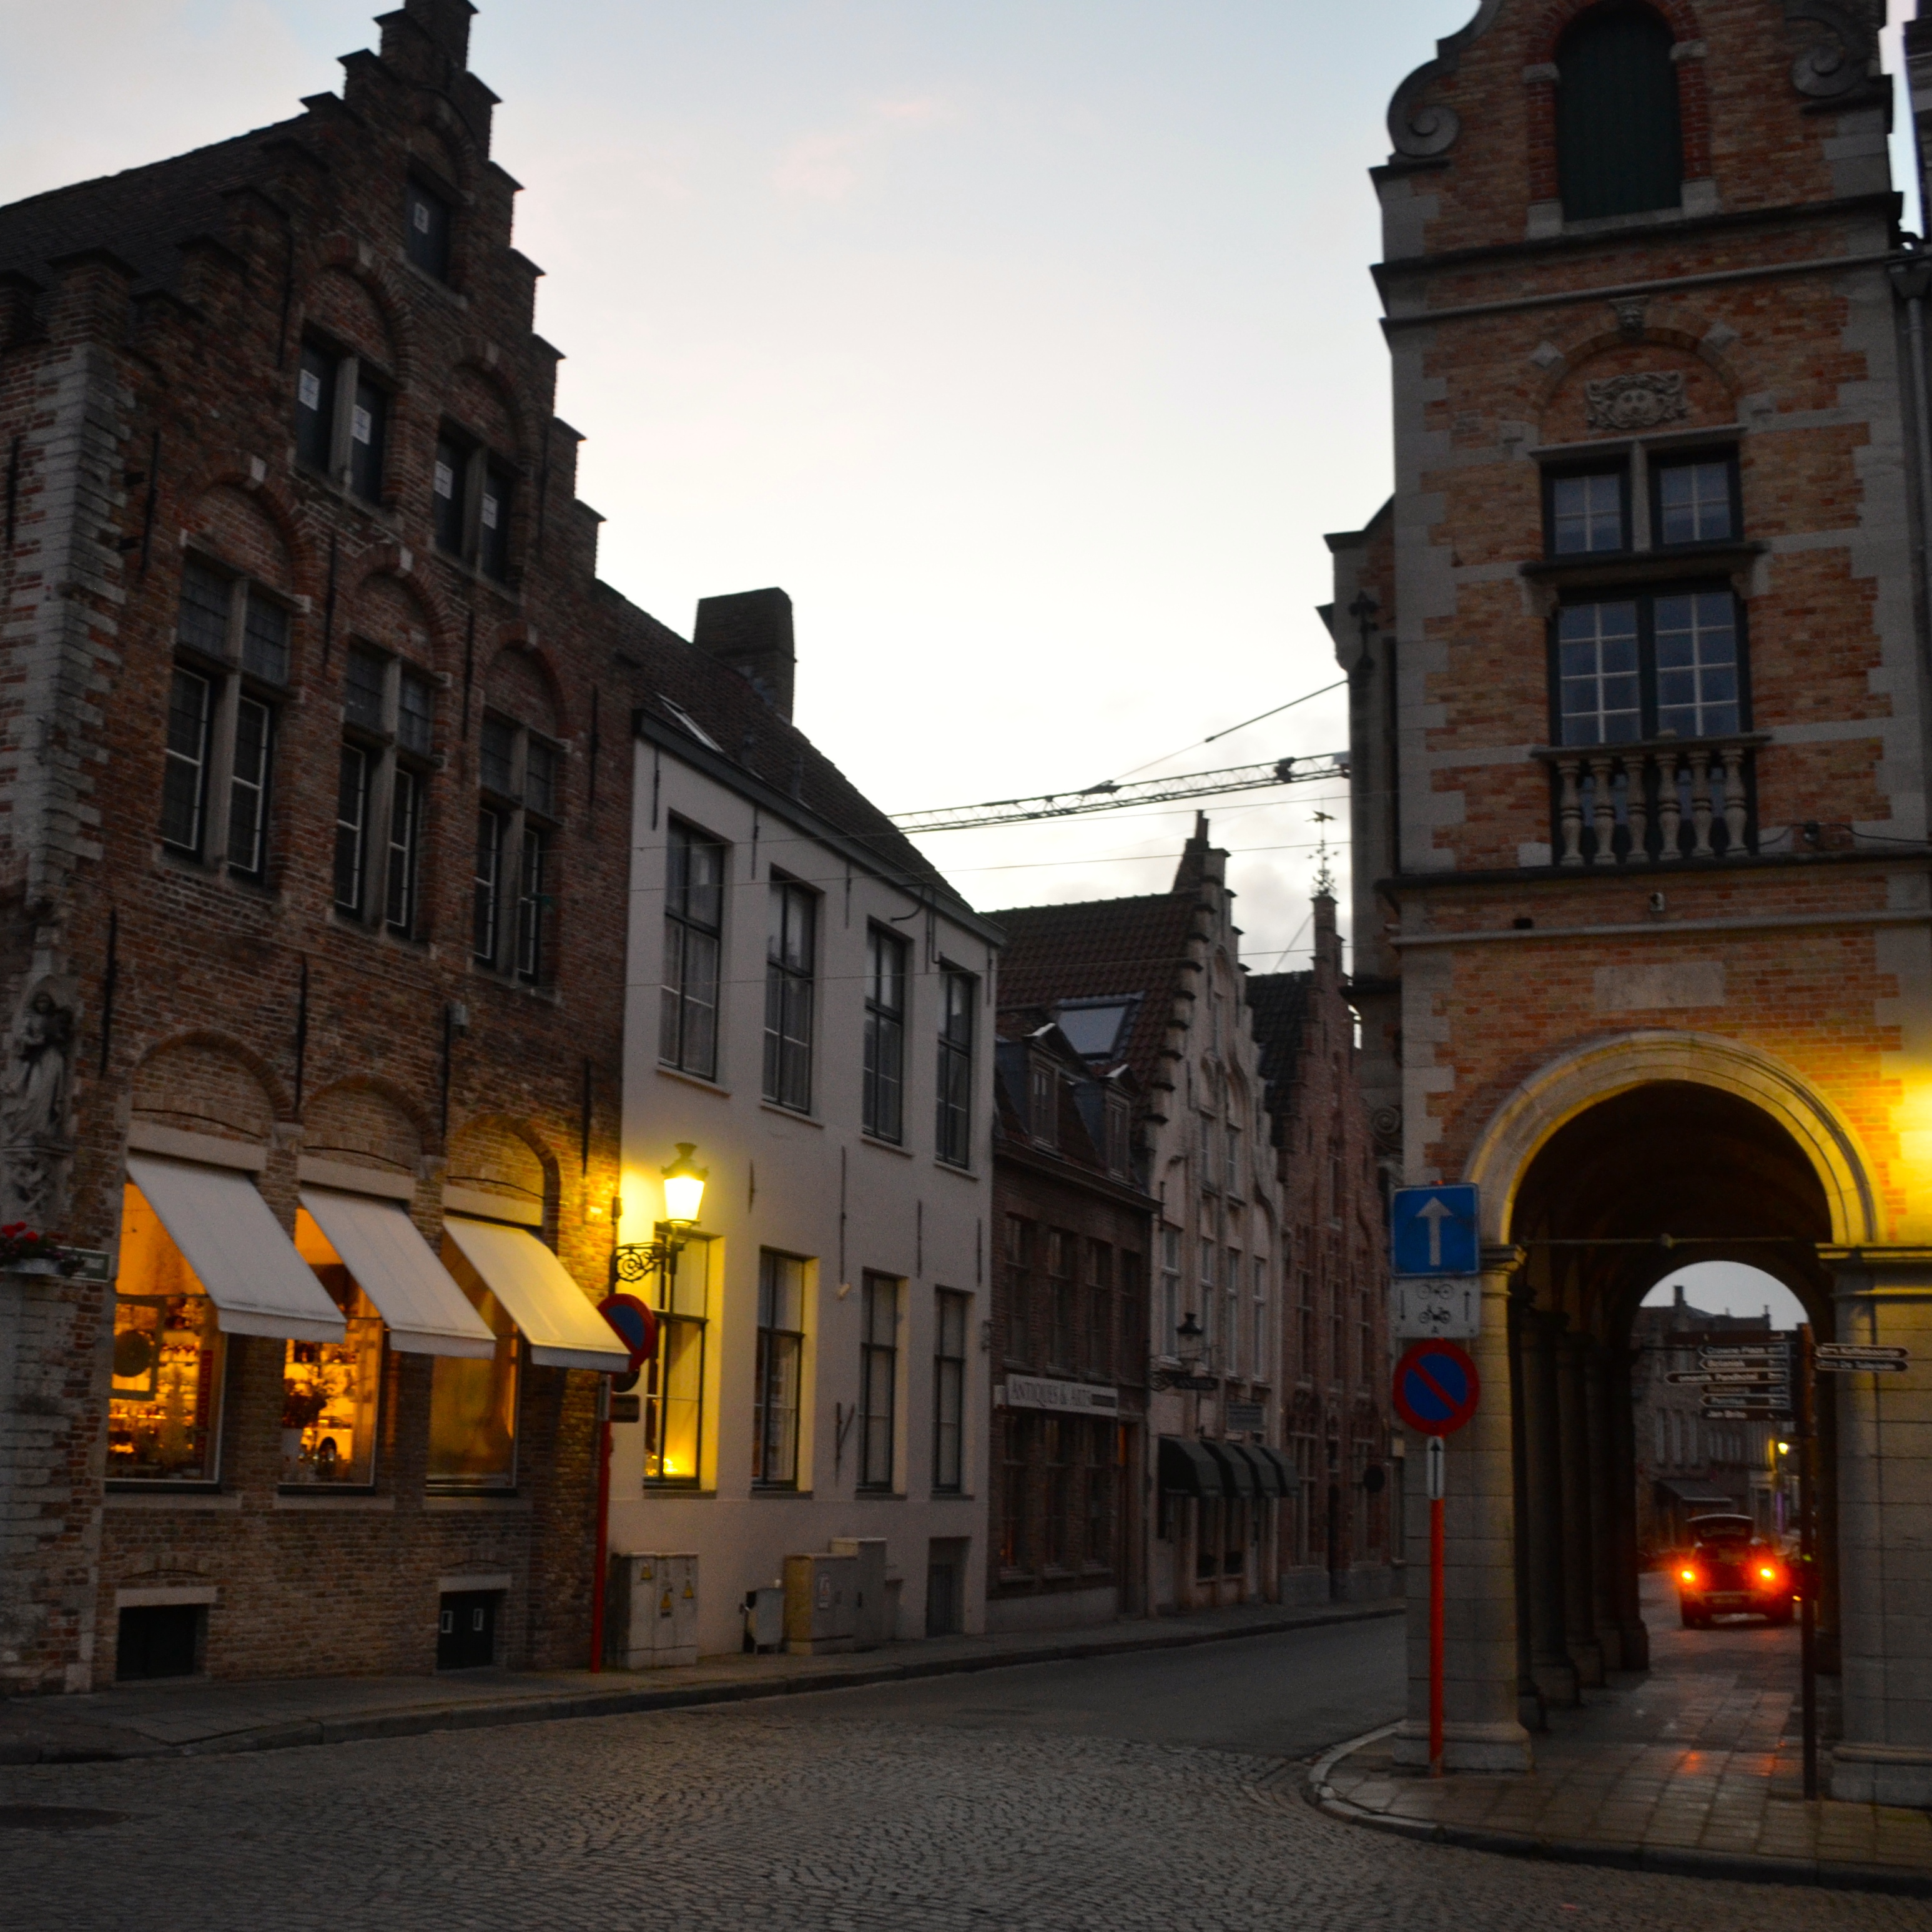 THE MOST CHARMING HOUSE IN BRUGGE - After Orange County